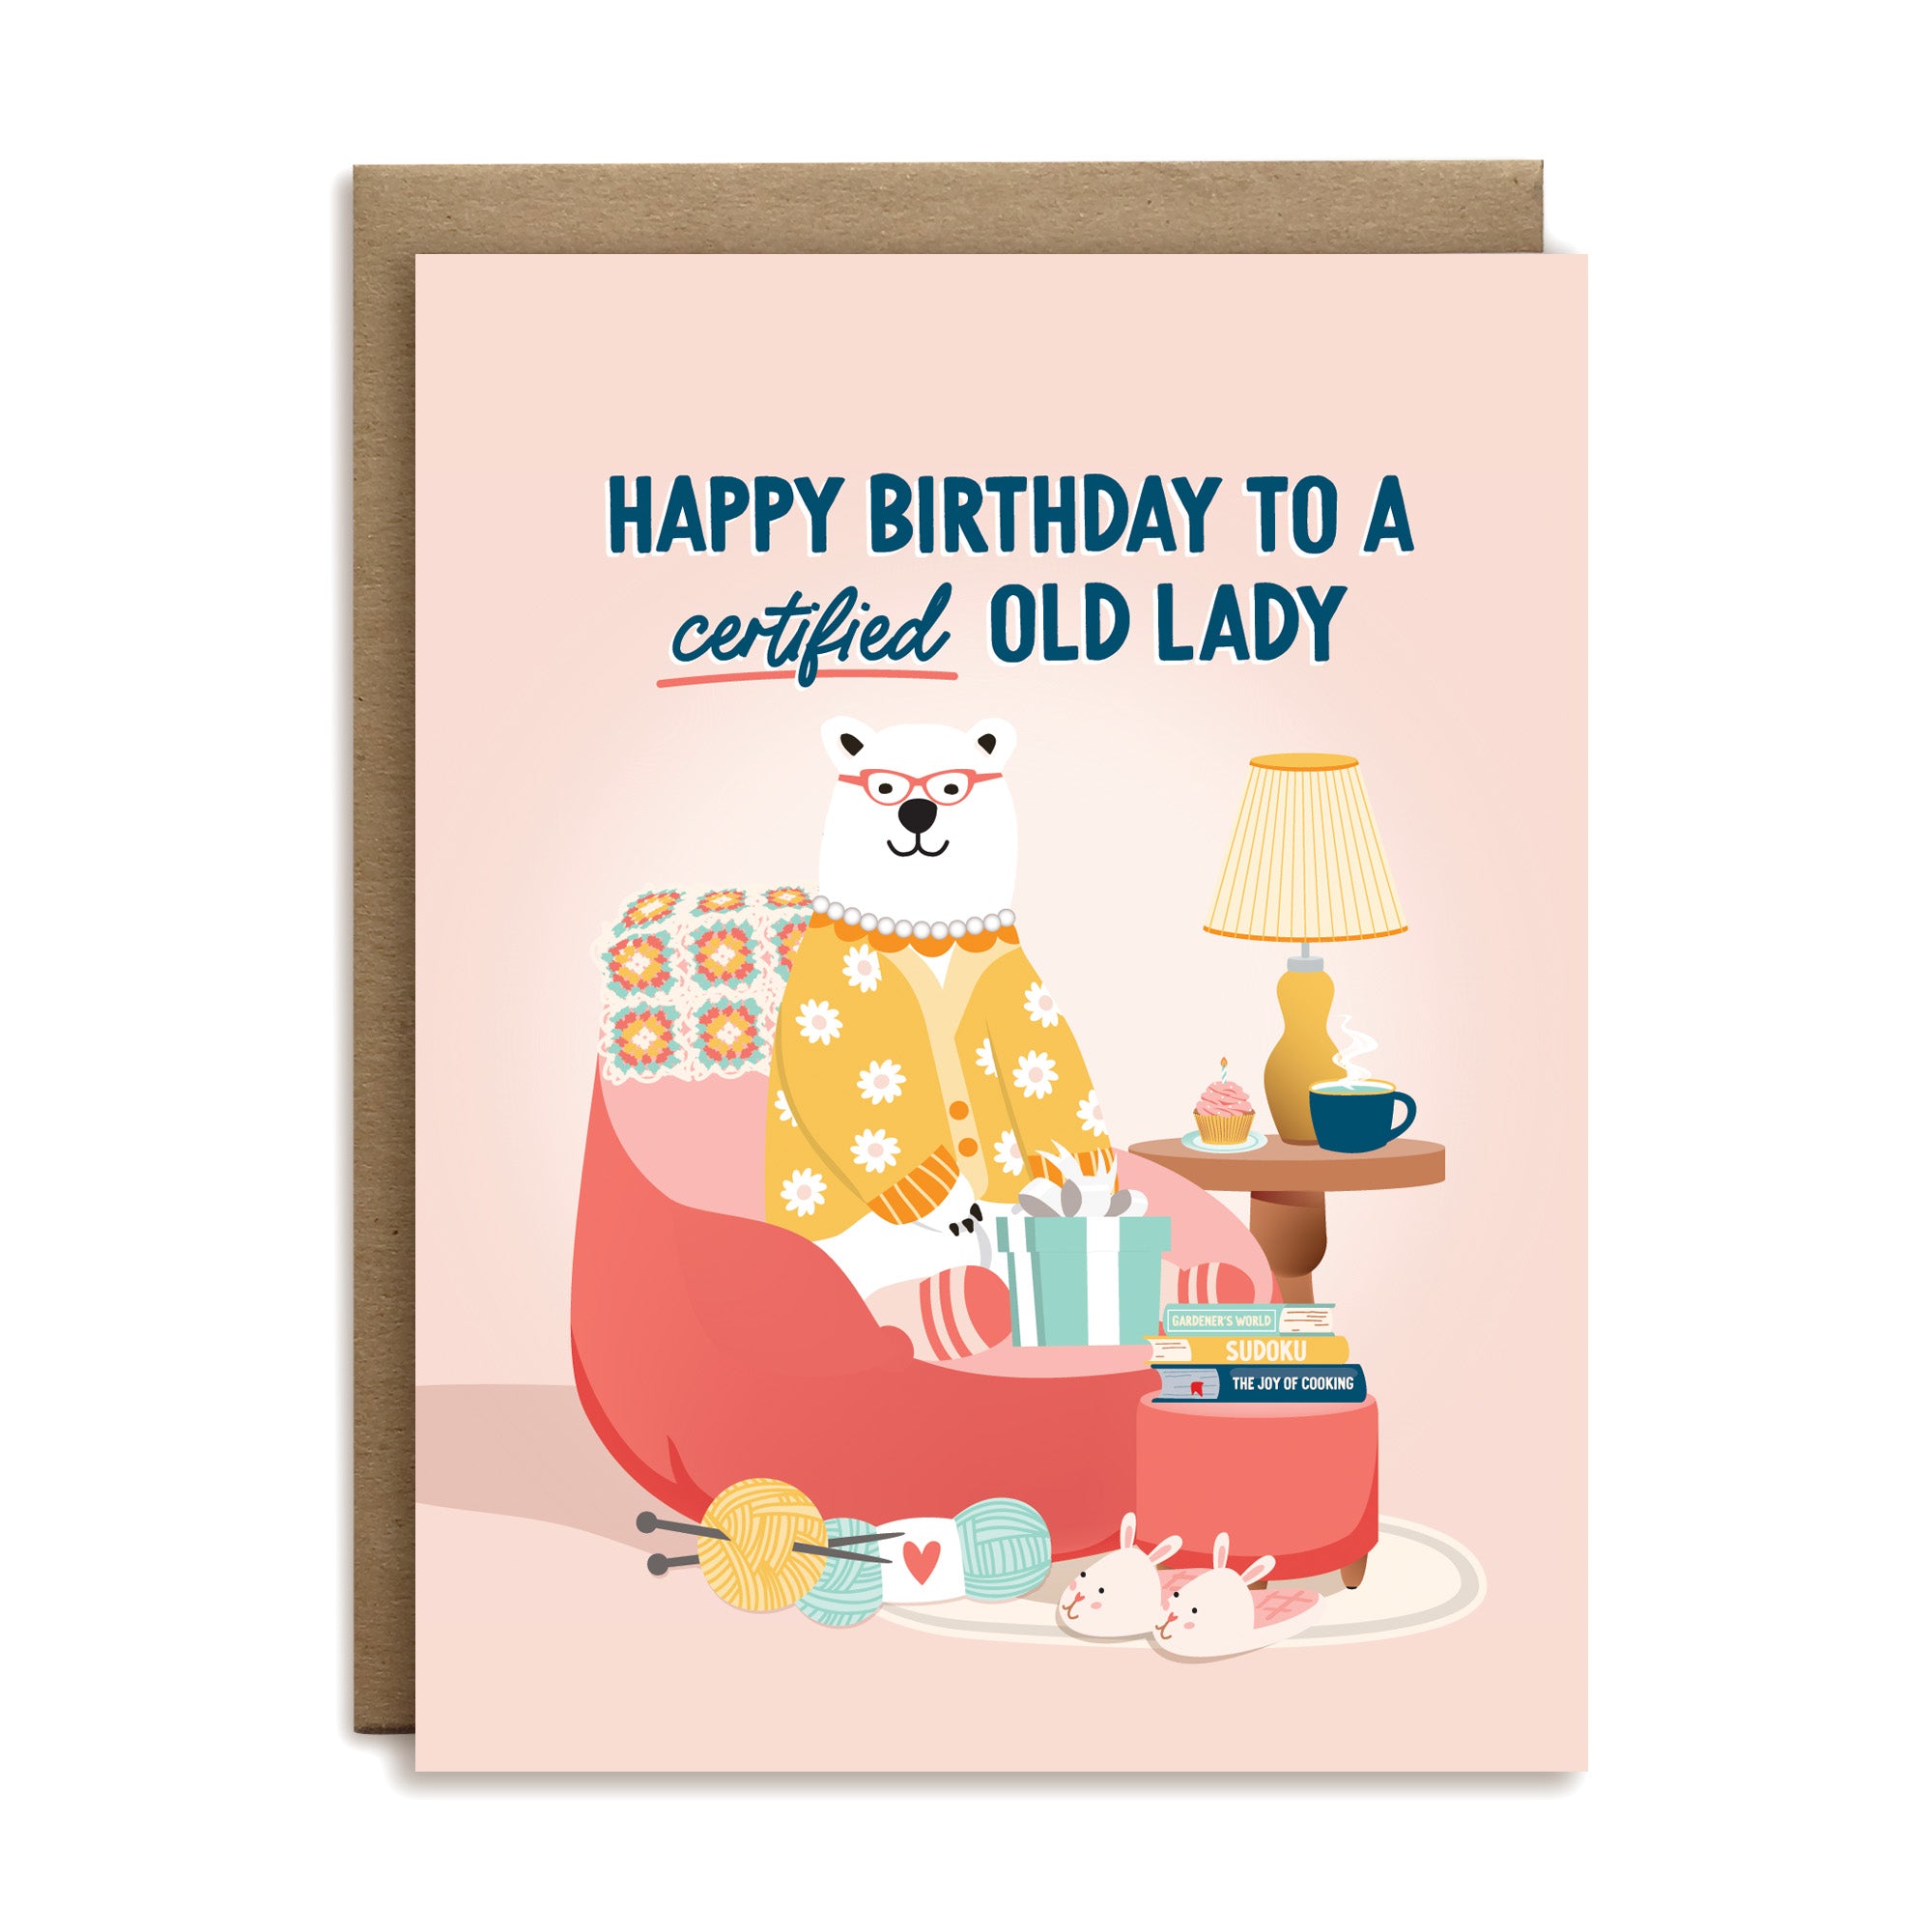 Happy birthday to a certified old lady birthday greeting card by I&